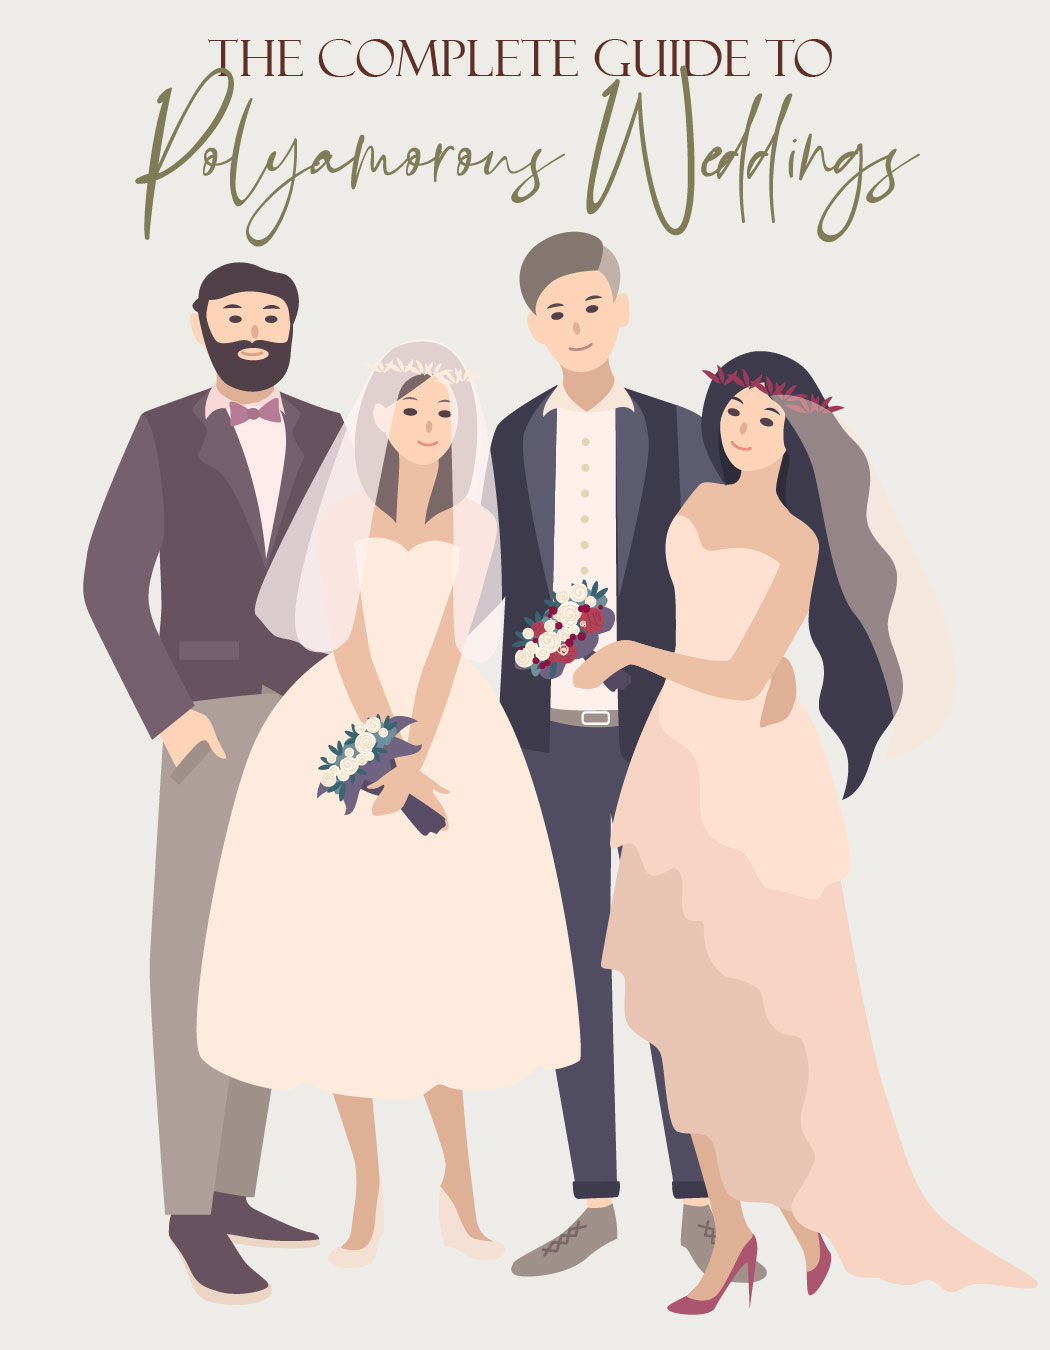 graphic of "the Complete Guide to Polyamorous Weddings" with two brides and two grooms illustrated